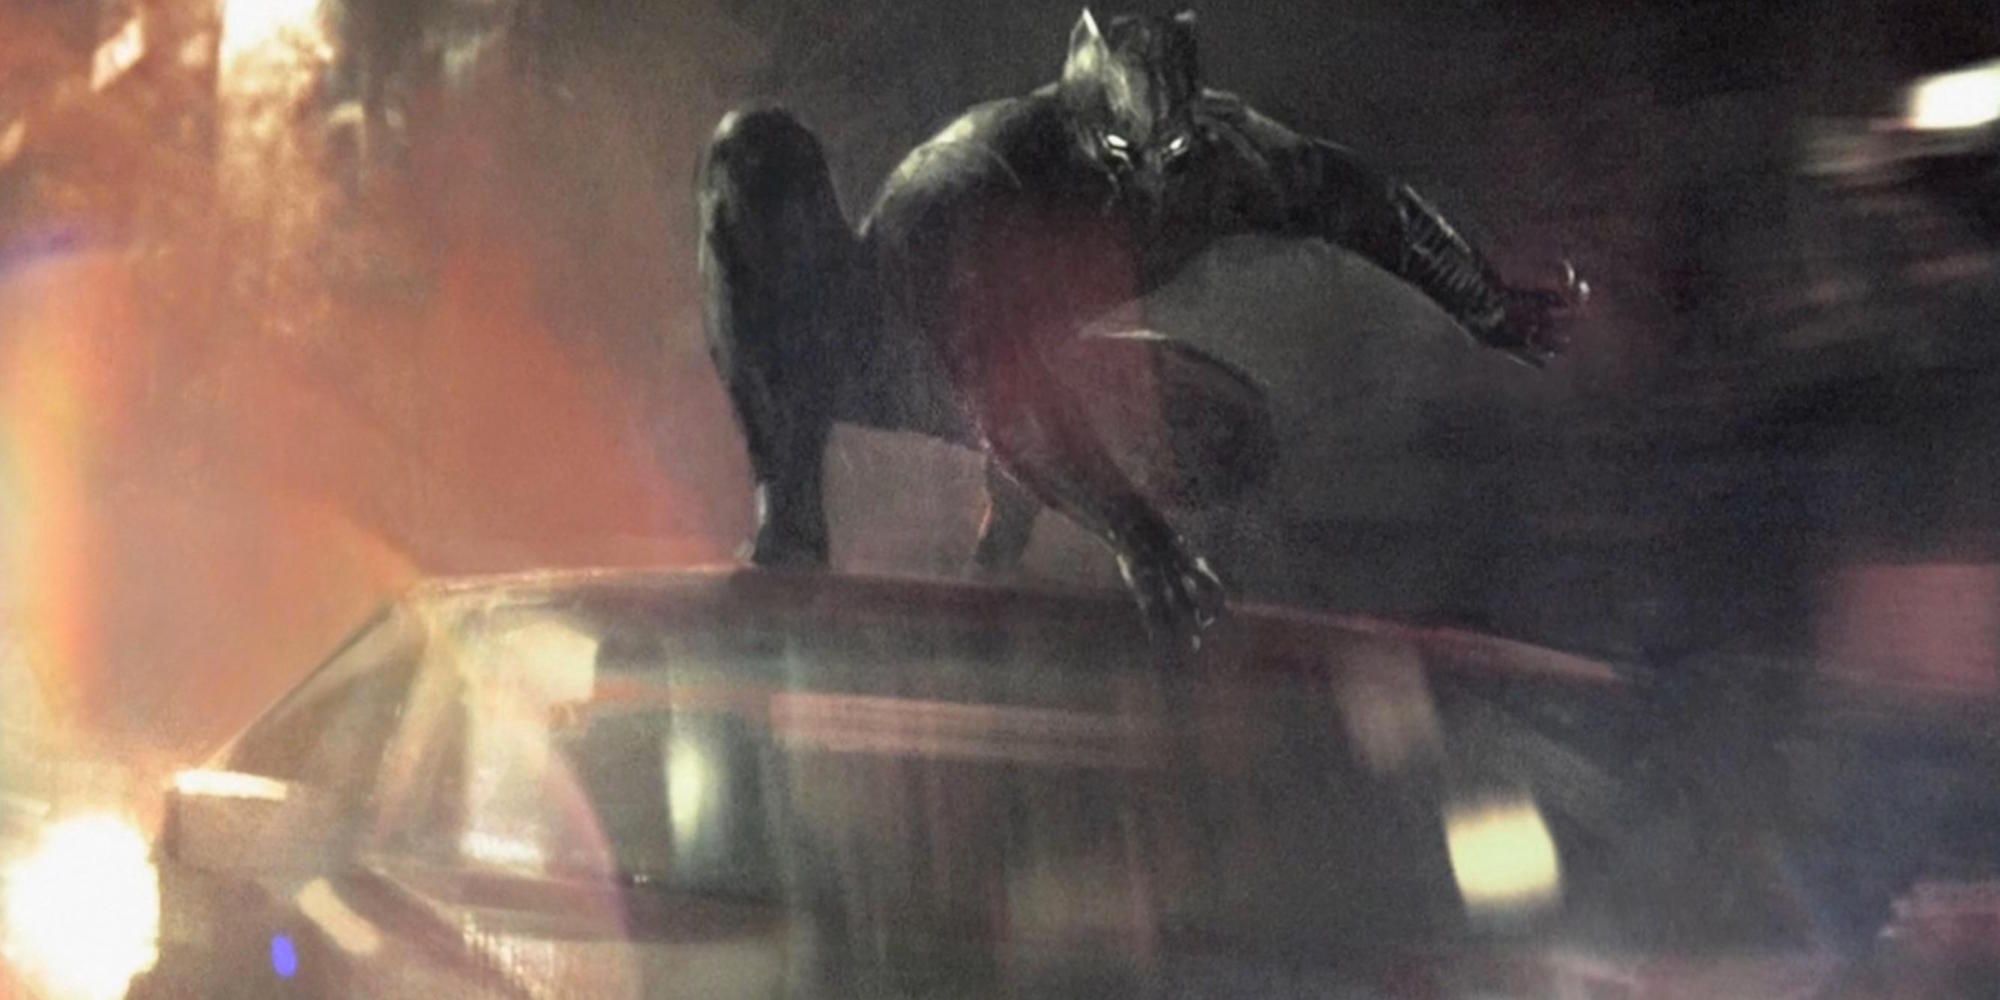 An image of Black Panther on top of a car